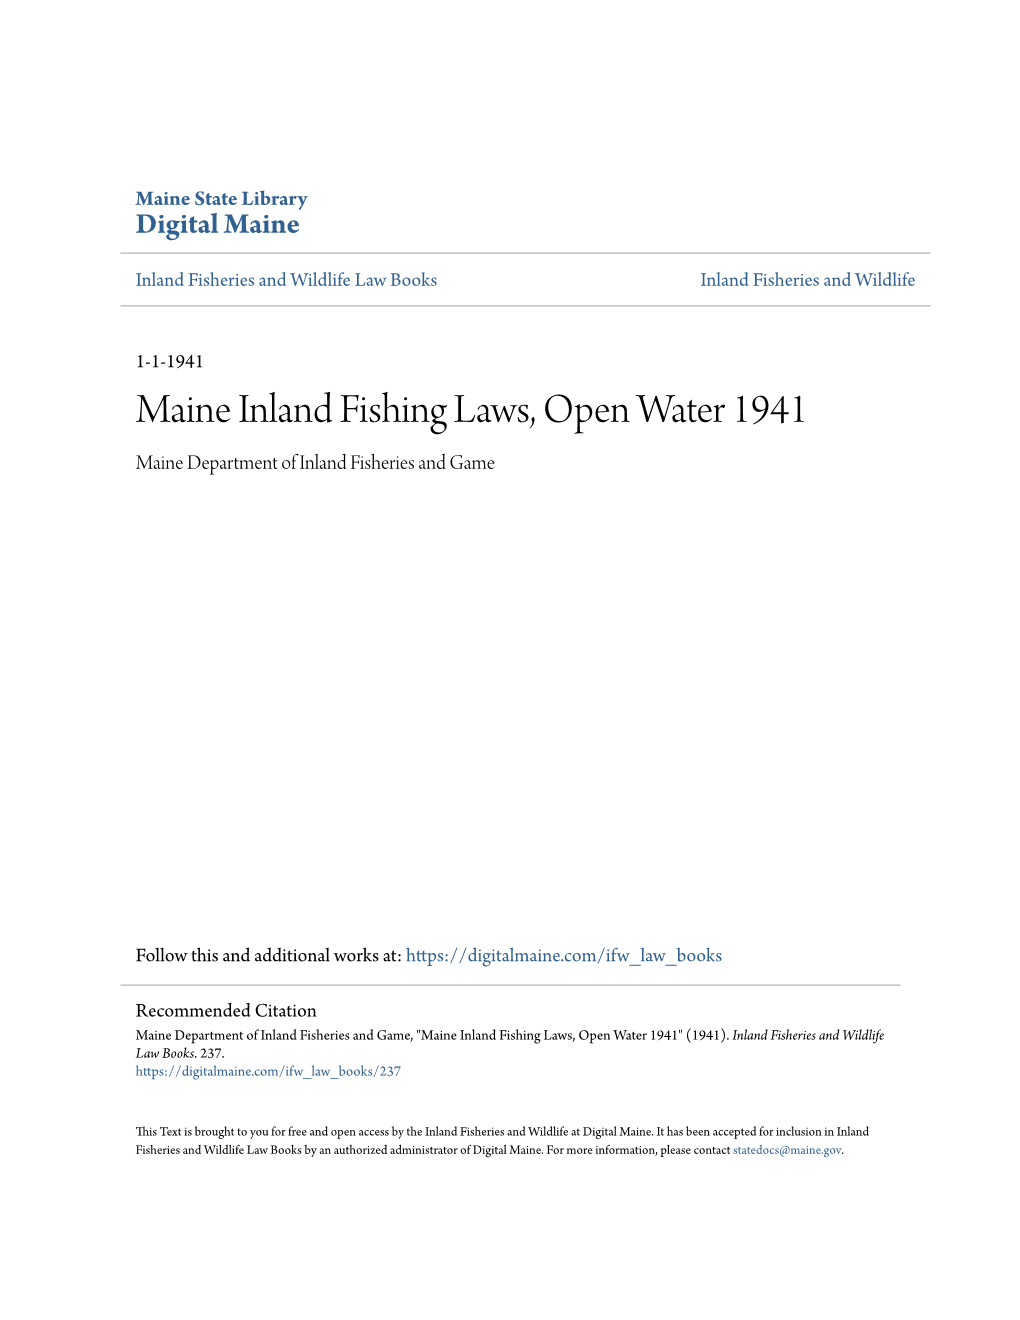 Maine Inland Fishing Laws, Open Water 1941 Maine Department of Inland Fisheries and Game